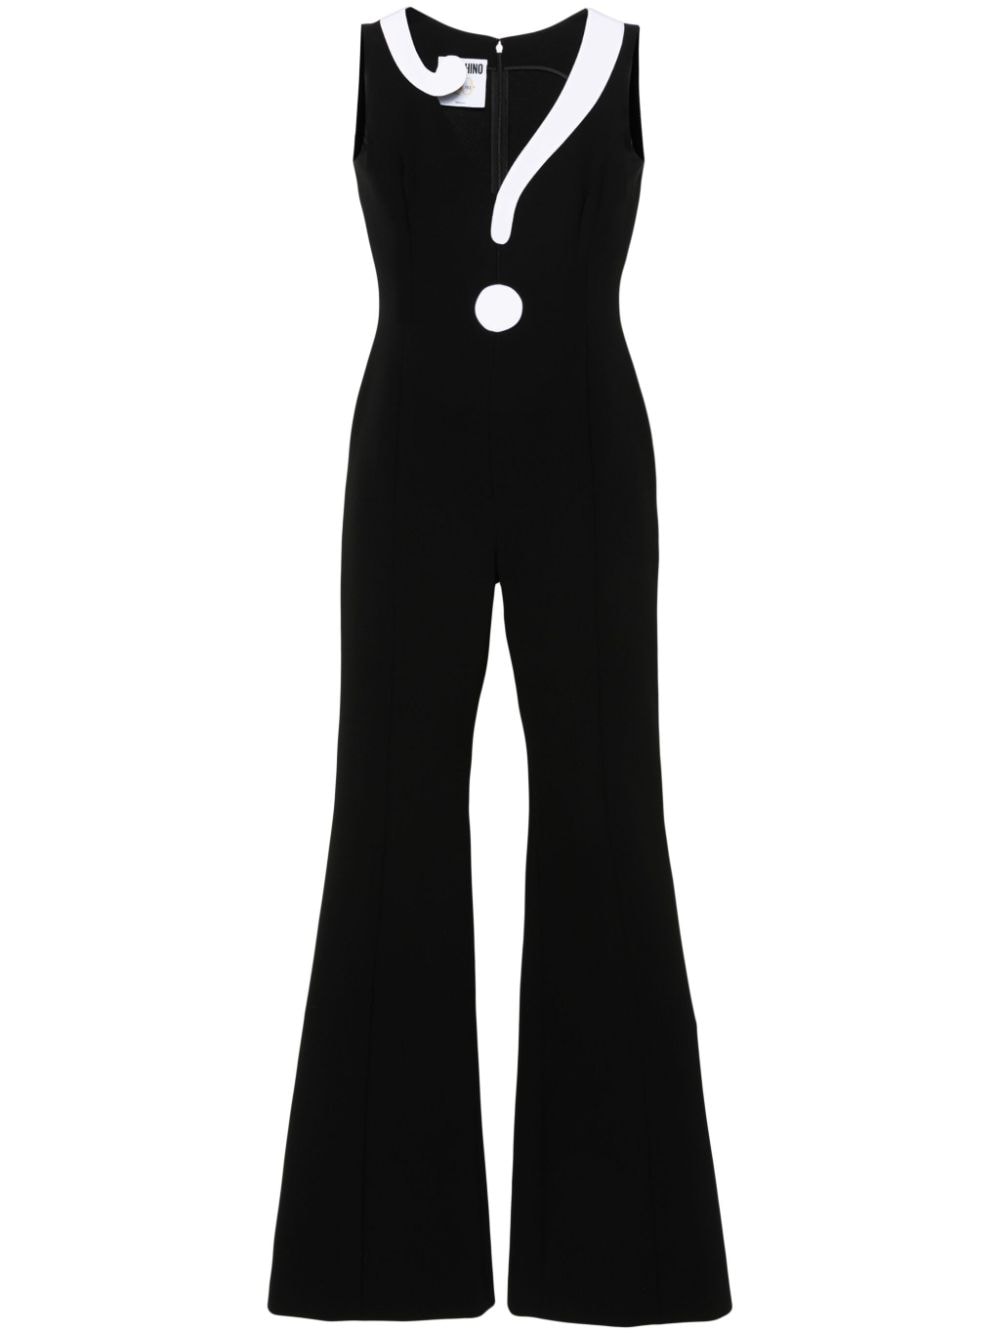 Long jumpsuit with contrasting question mark print